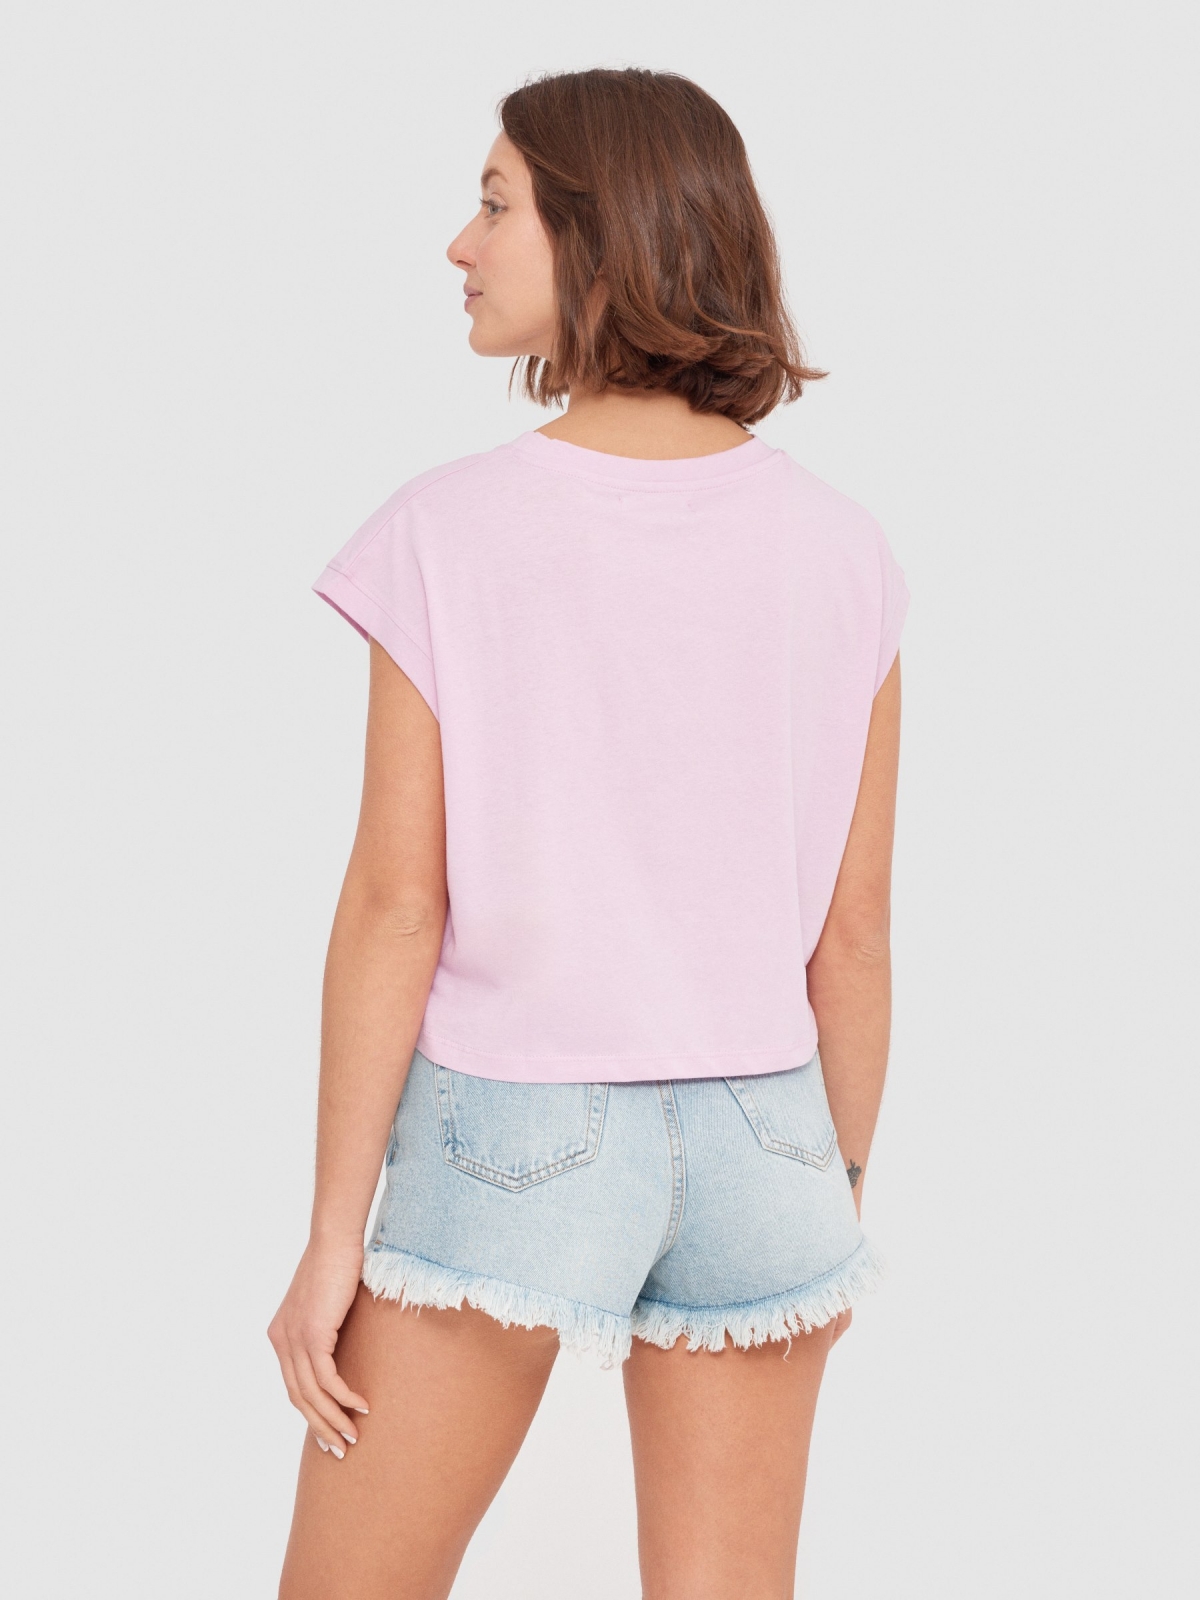 Message crop top magenta middle back view